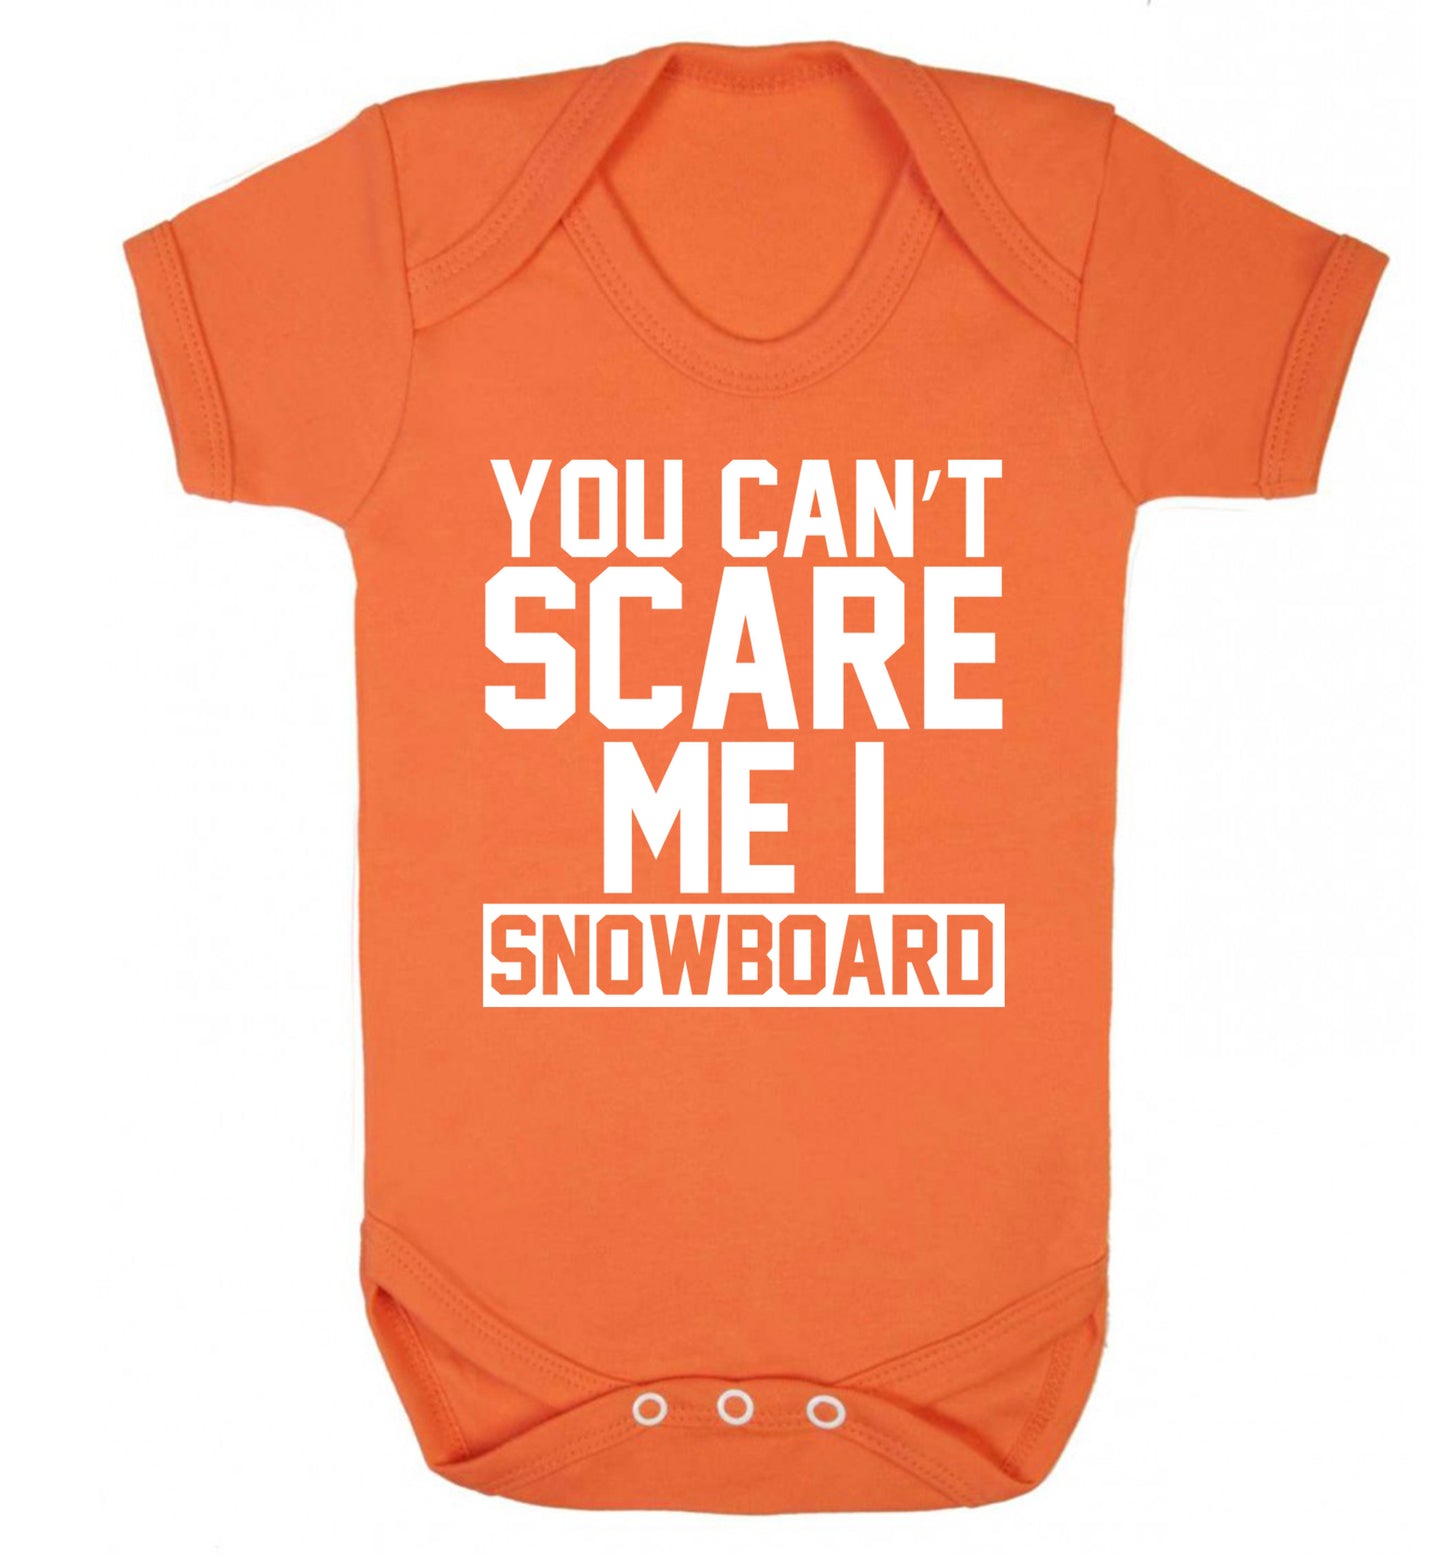 You can't scare me I snowboard Baby Vest orange 18-24 months